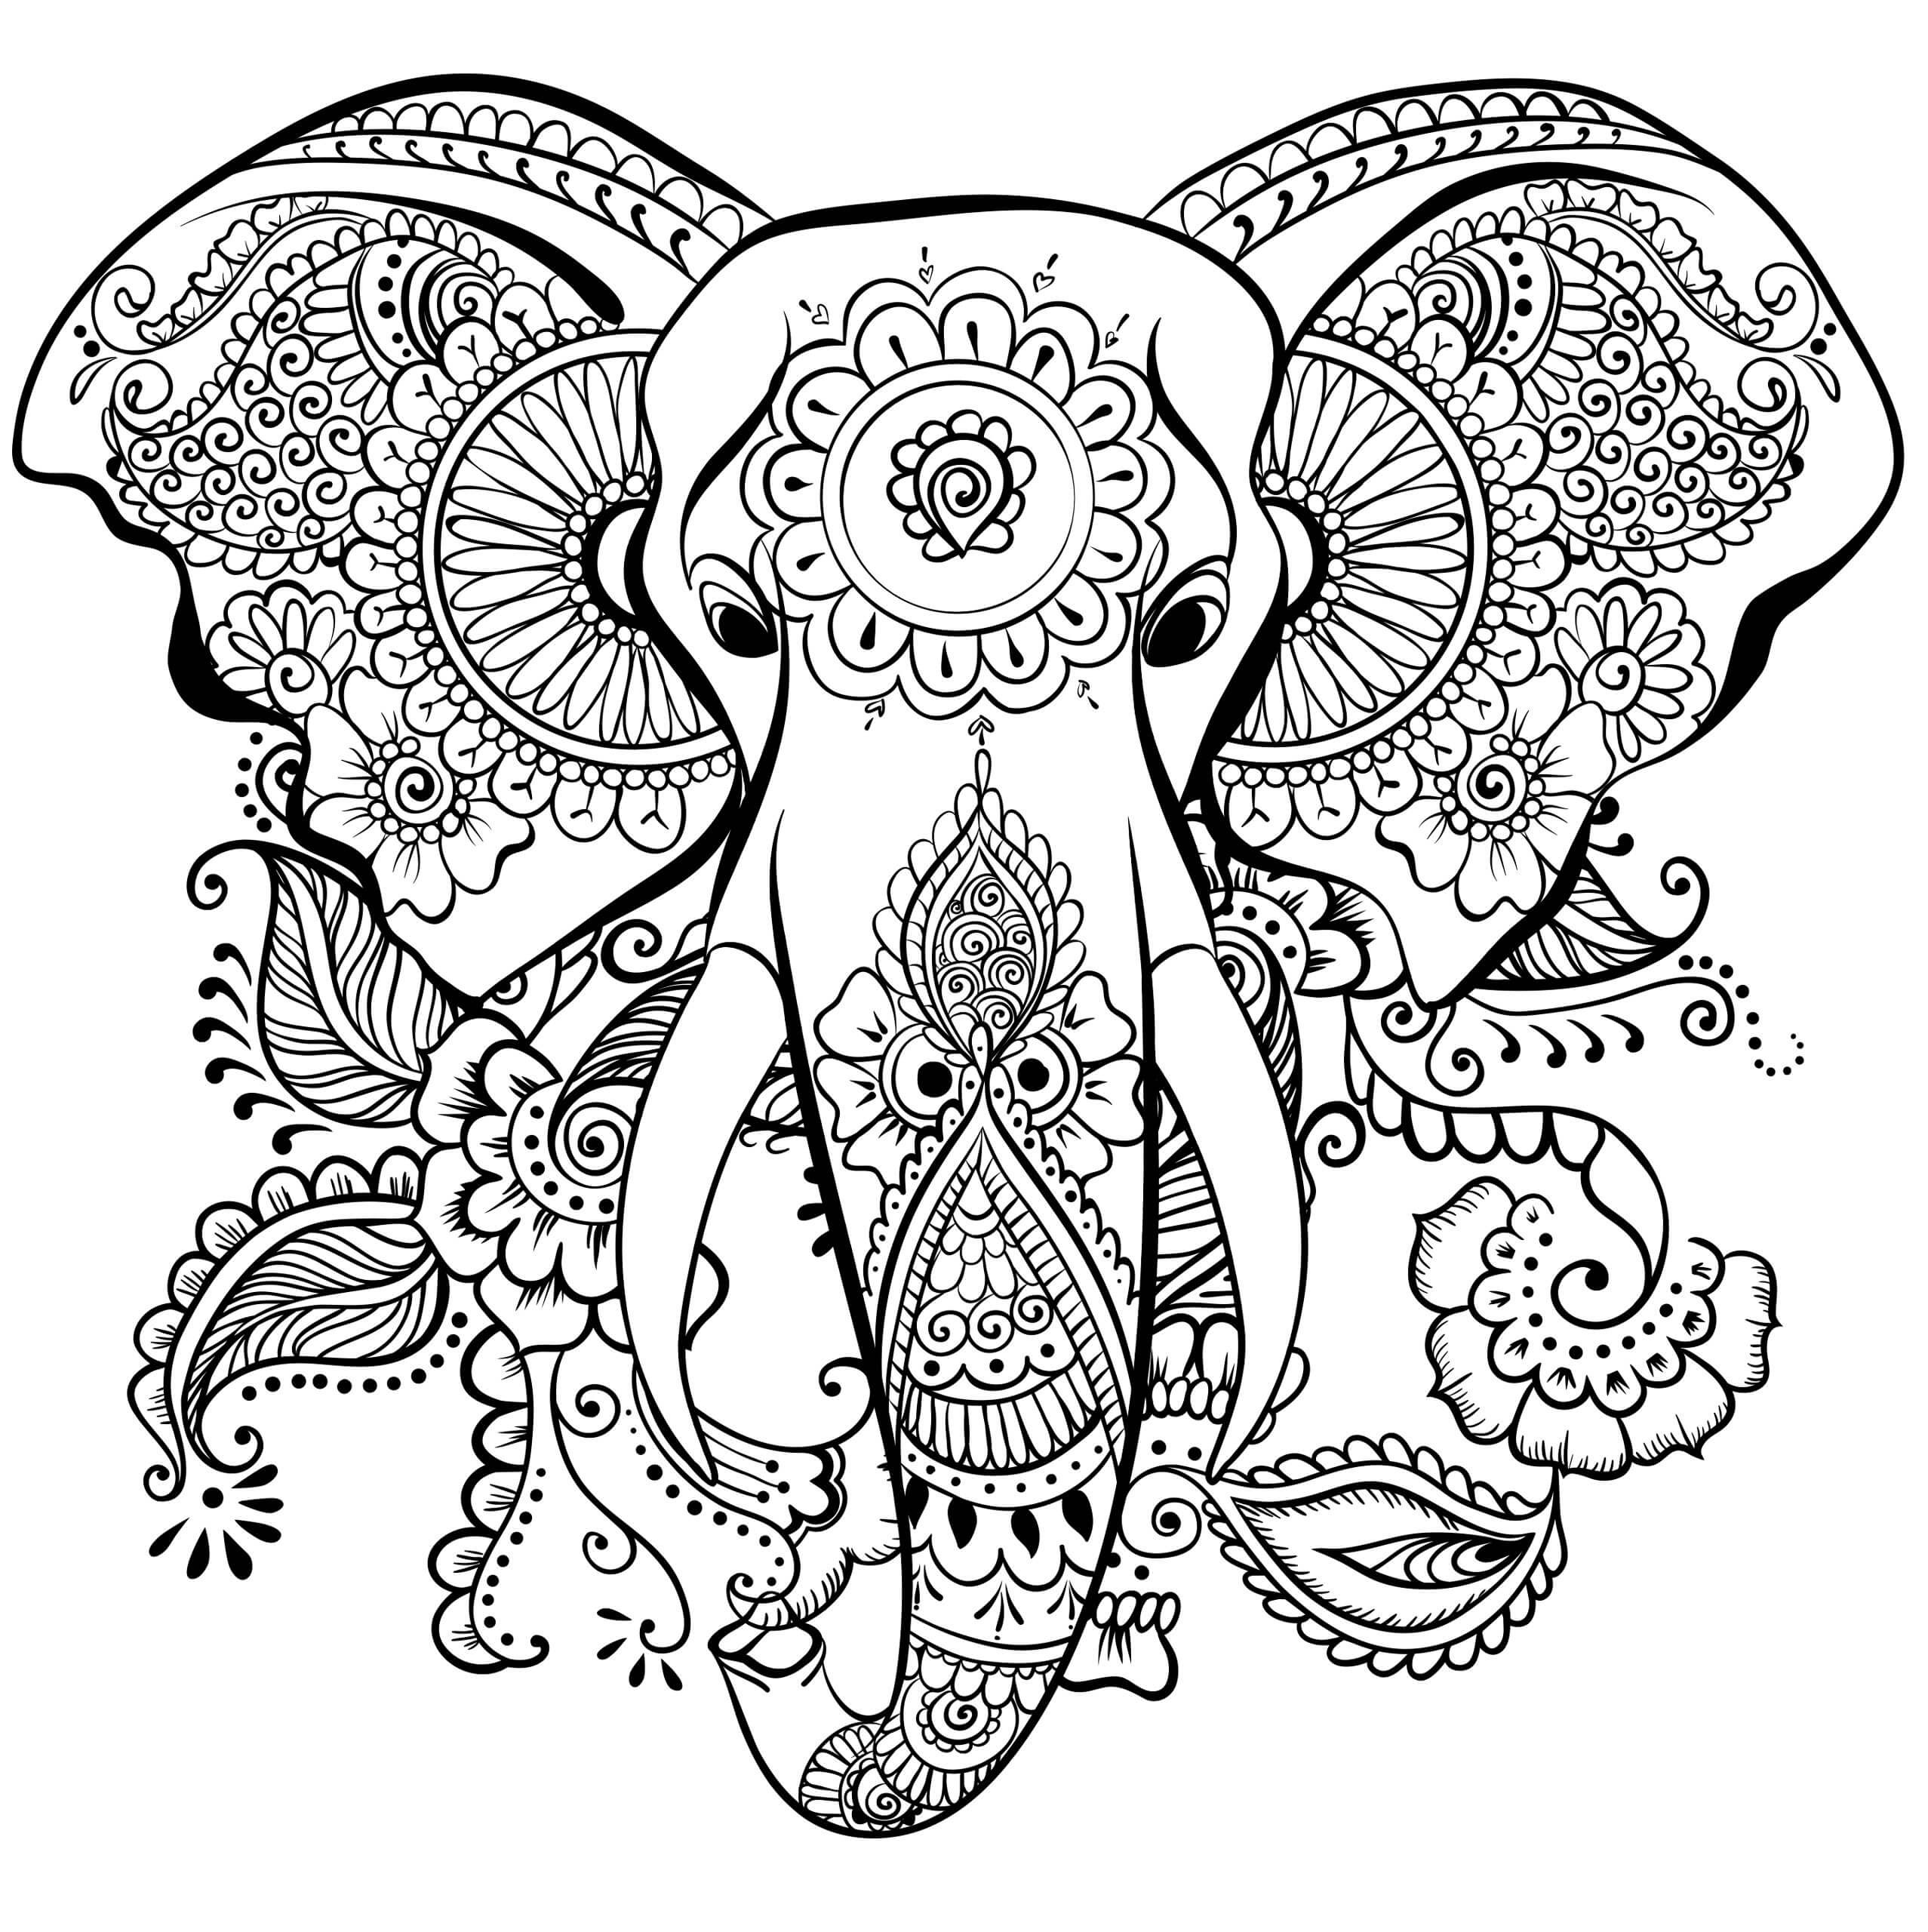 Coloring Pages For Teens Animals
 Coloring Pages For Adults Difficult Animals 7